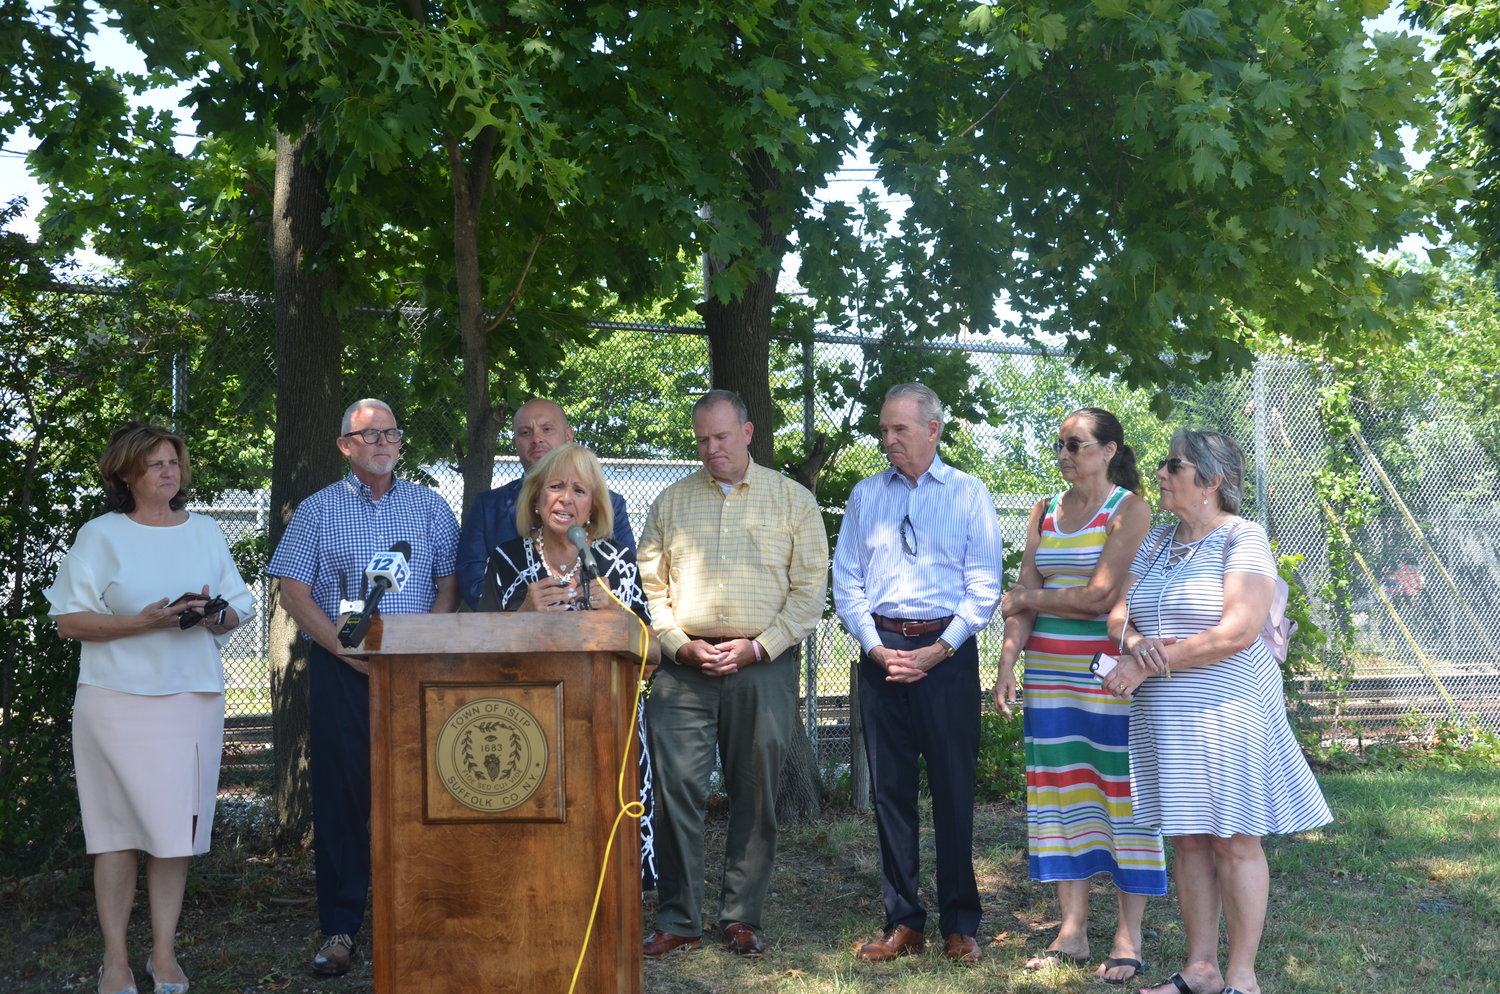 Angie Carpenter speaks at a press conference announcing a $3 million grant for a new sewer connection for downtown Central Islip.